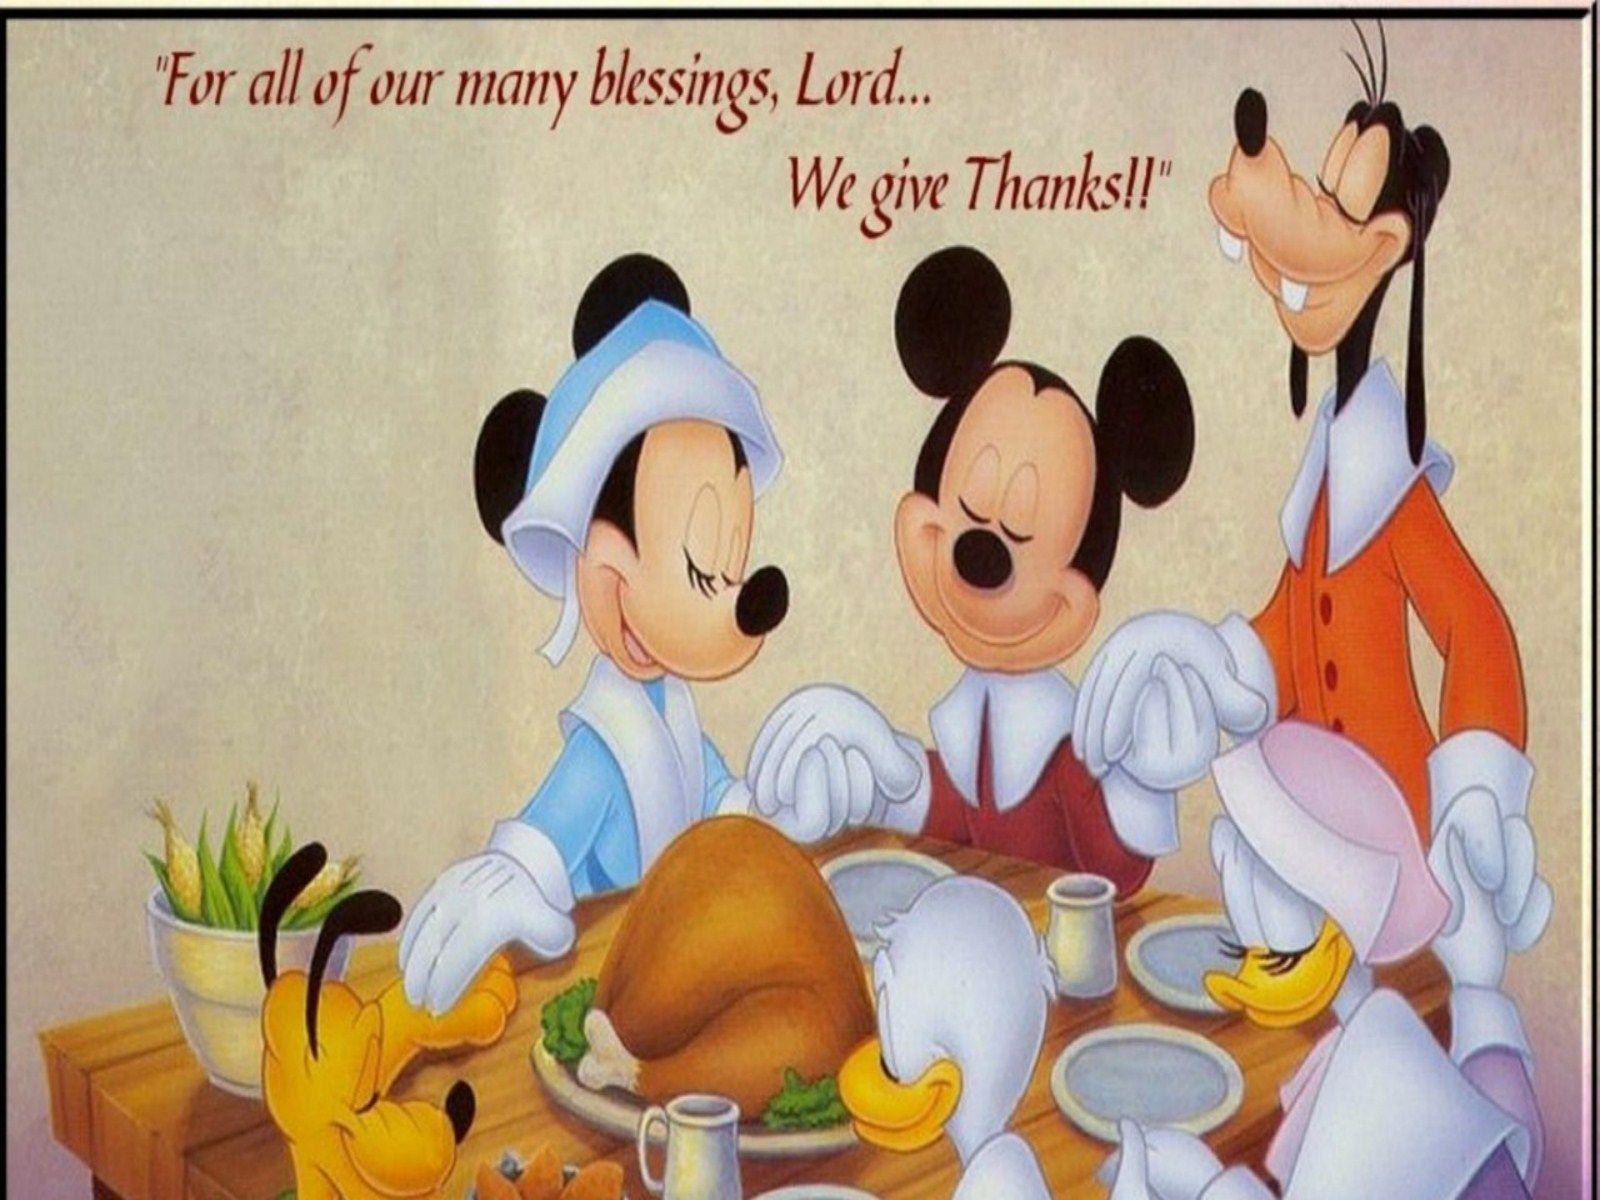 Download Free Disney Thanksgiving Iphone And Wallpapers 1600x1200.